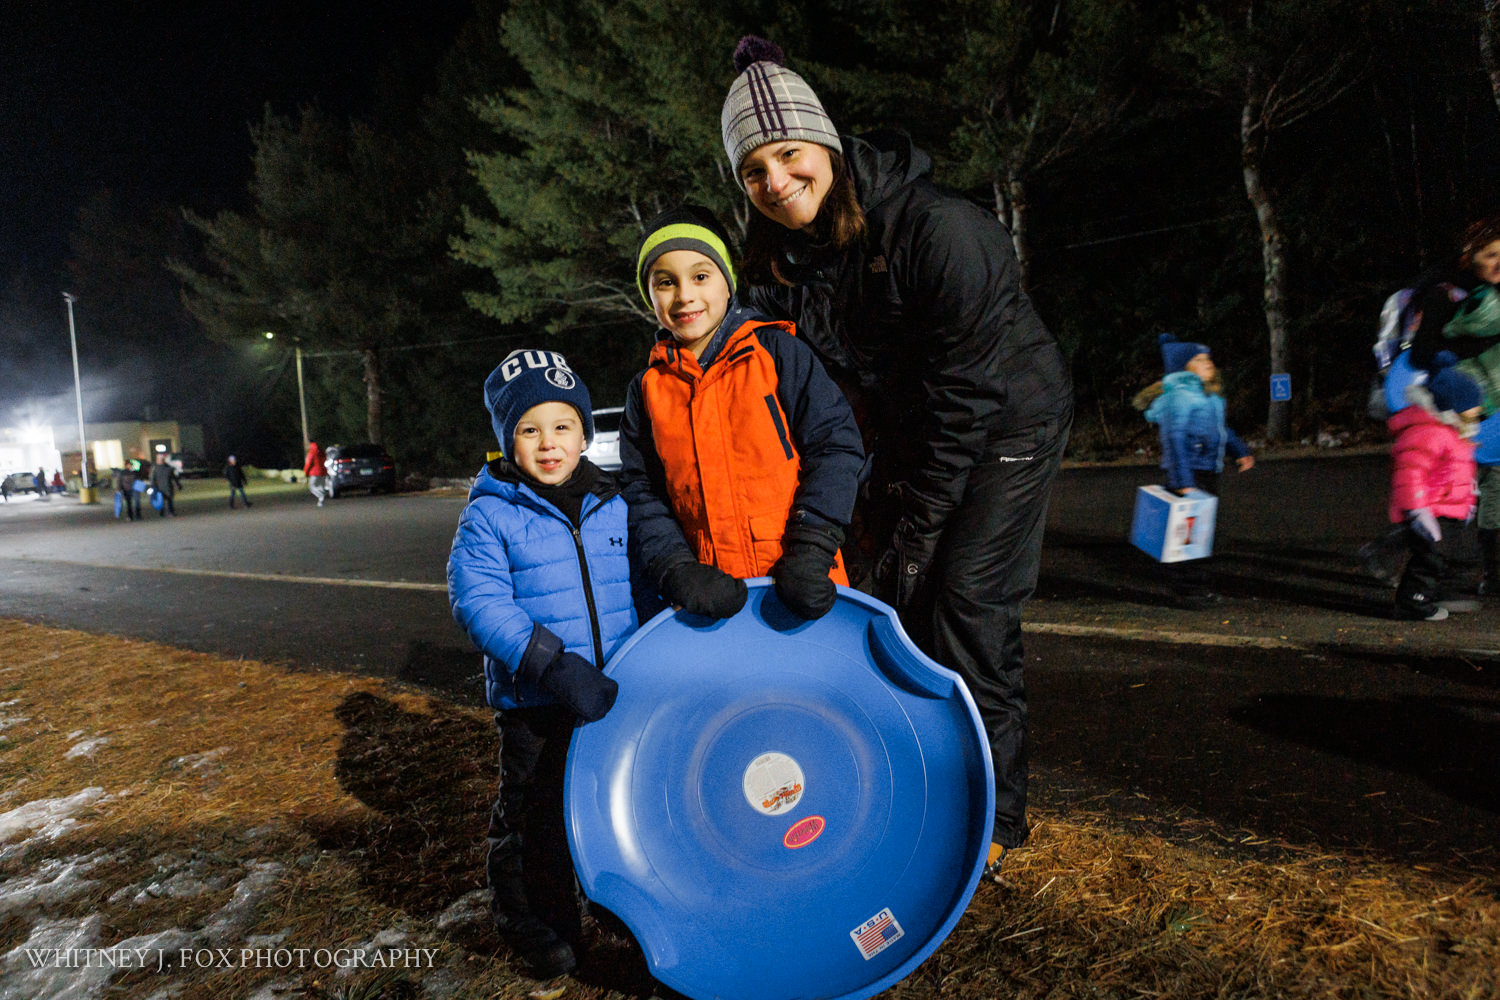 111 winter kids welcome to winter 2022 lost valley auburn maine documentary event photographer whitney j fox 4049 w